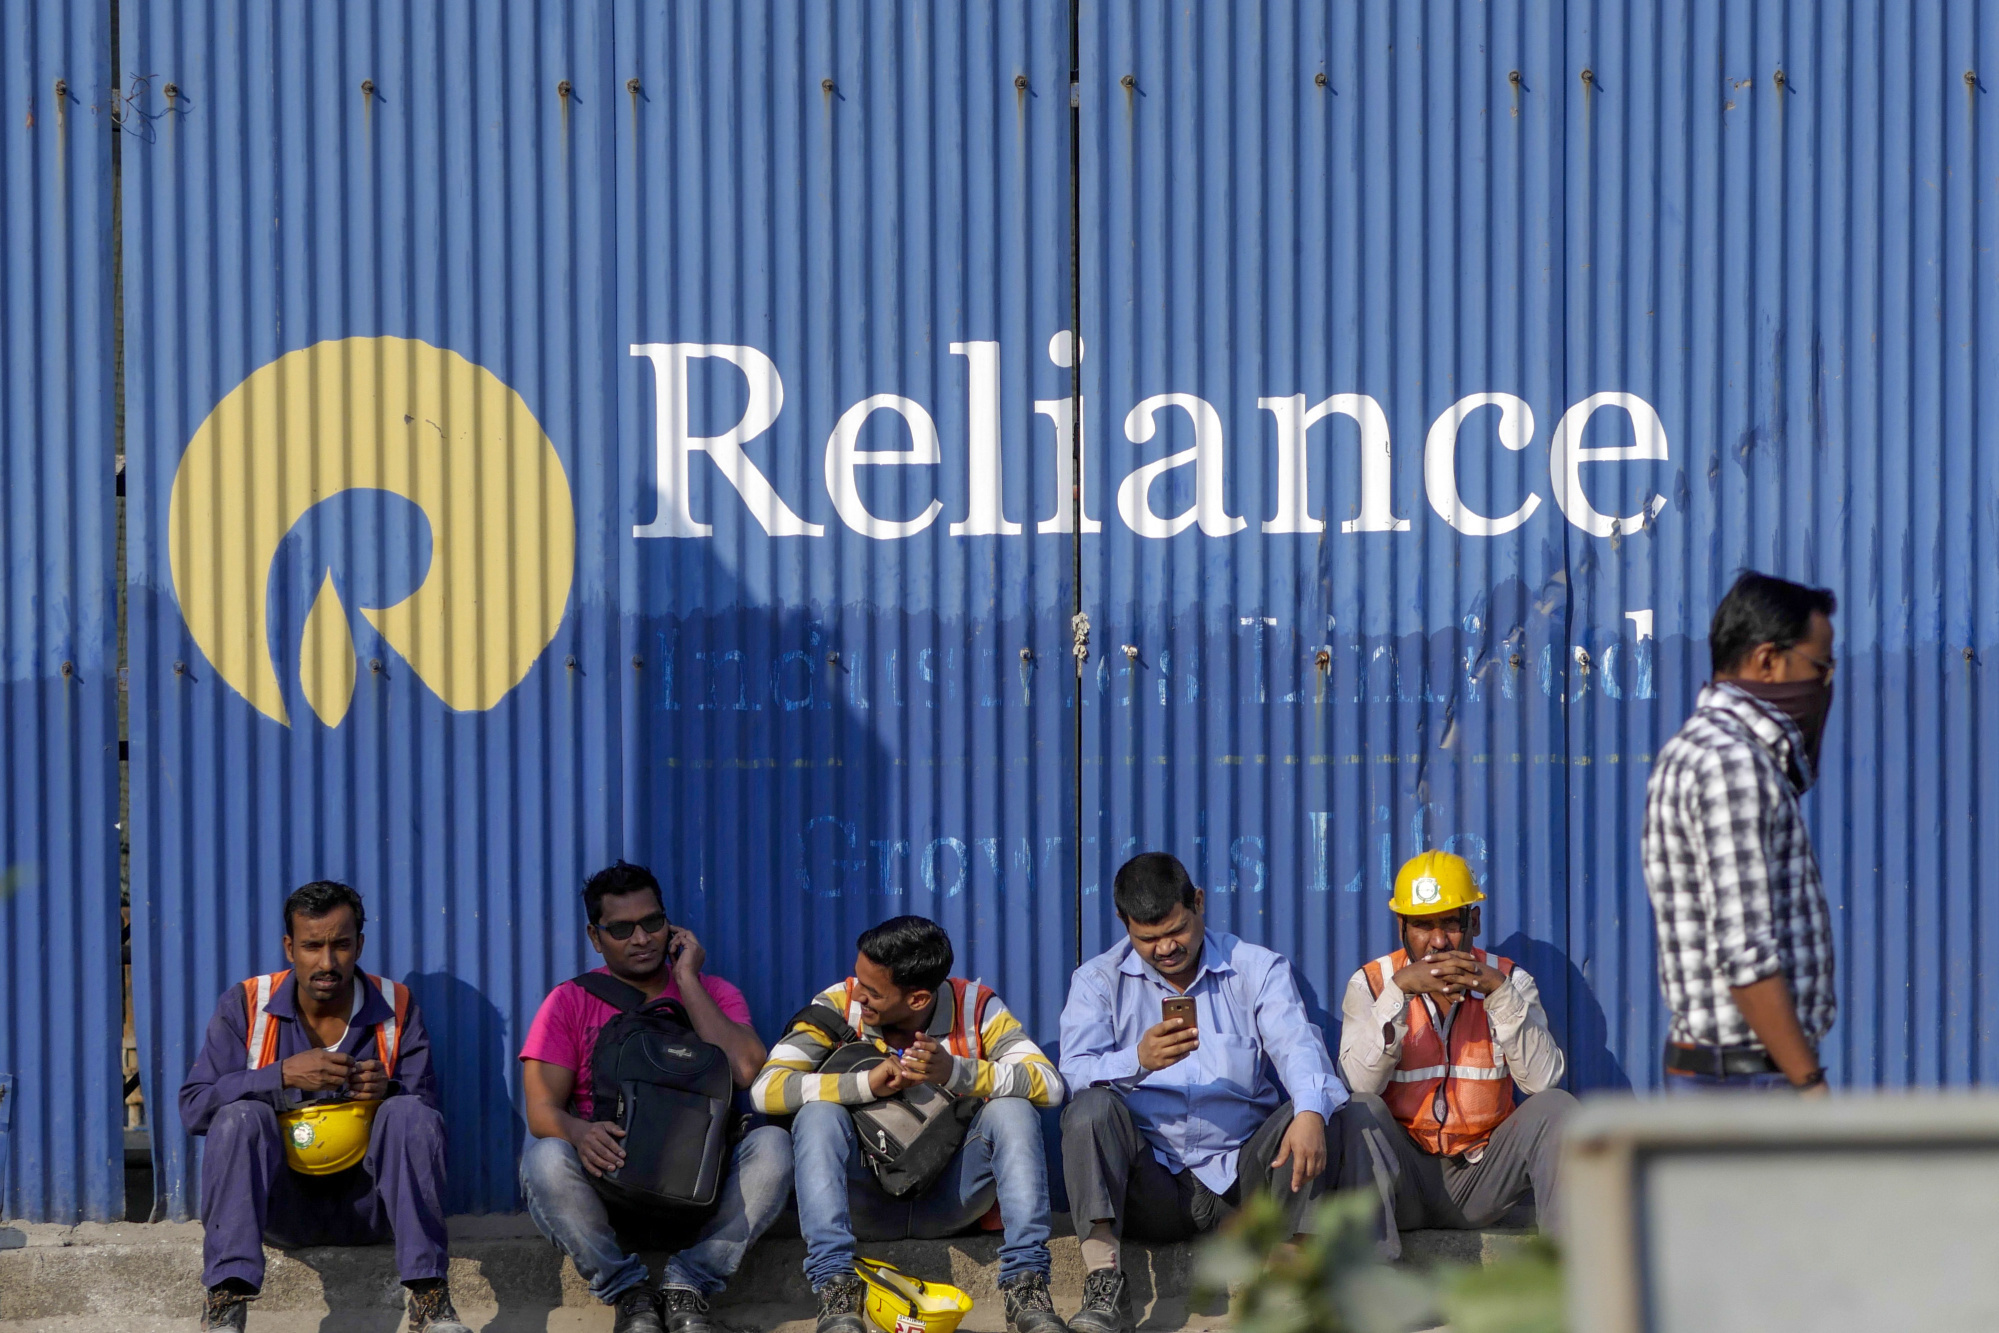 Laborers sit outside a Reliance Industries construction site at the Bandra Kurla Complex in Mumbai, India, on Sunday, Jan. 28, 2018. India's economy is expected to grow at 6.75 percent this year on the back of a recovery in second half of the year, Chief Economic Adviser Arvind Subramanian said in the Economic Survey presented in Parliament on Nov. 29. Photographer: Dhiraj Singh/Bloomberg